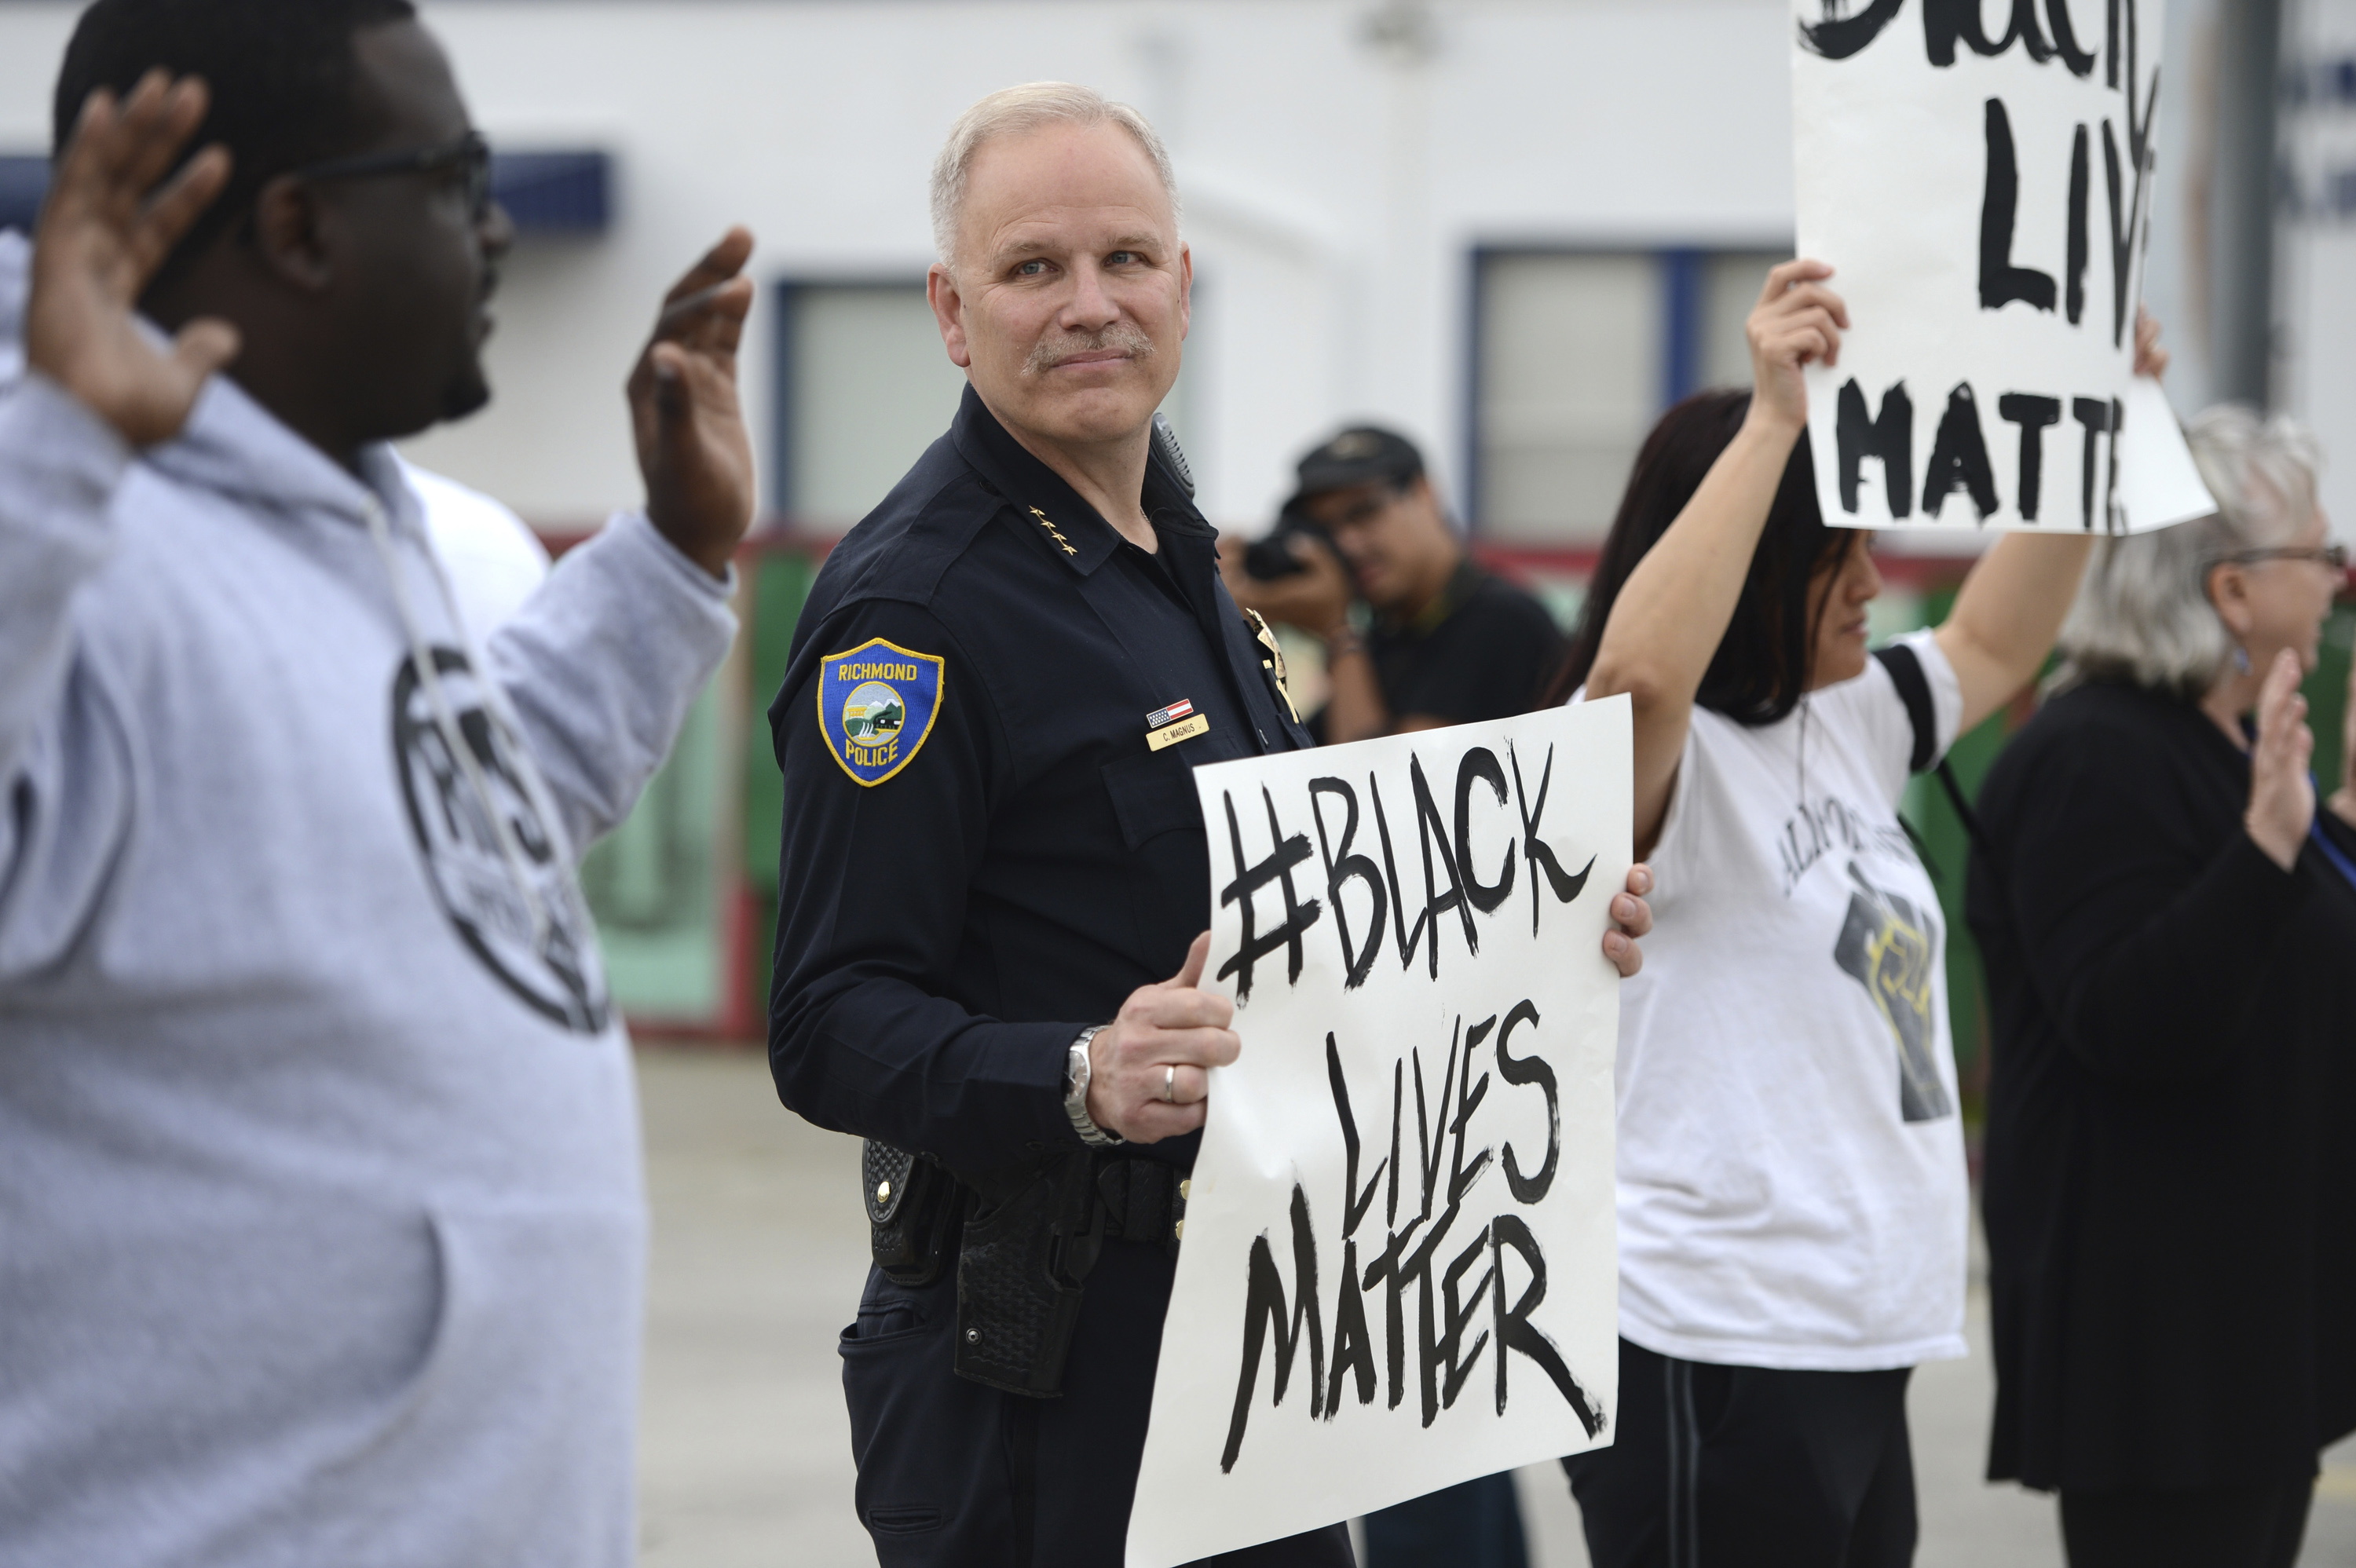 FILE - In this Dec. 9, 2014, file photo, Richmond Chief of Police Chris Magnus stands with demonstrators to protest the Michael Brown and Eric Garner deaths during a peaceful demonstration in Richmond, Calif. In cities and states nationwide, police departments are already altering policies and procedures to temper concerns about police conduct in the aftermath of recent cases of black males dying at the hands of white officers. (AP Photo/Bay Area News Group, Kristopher Skinner, File)